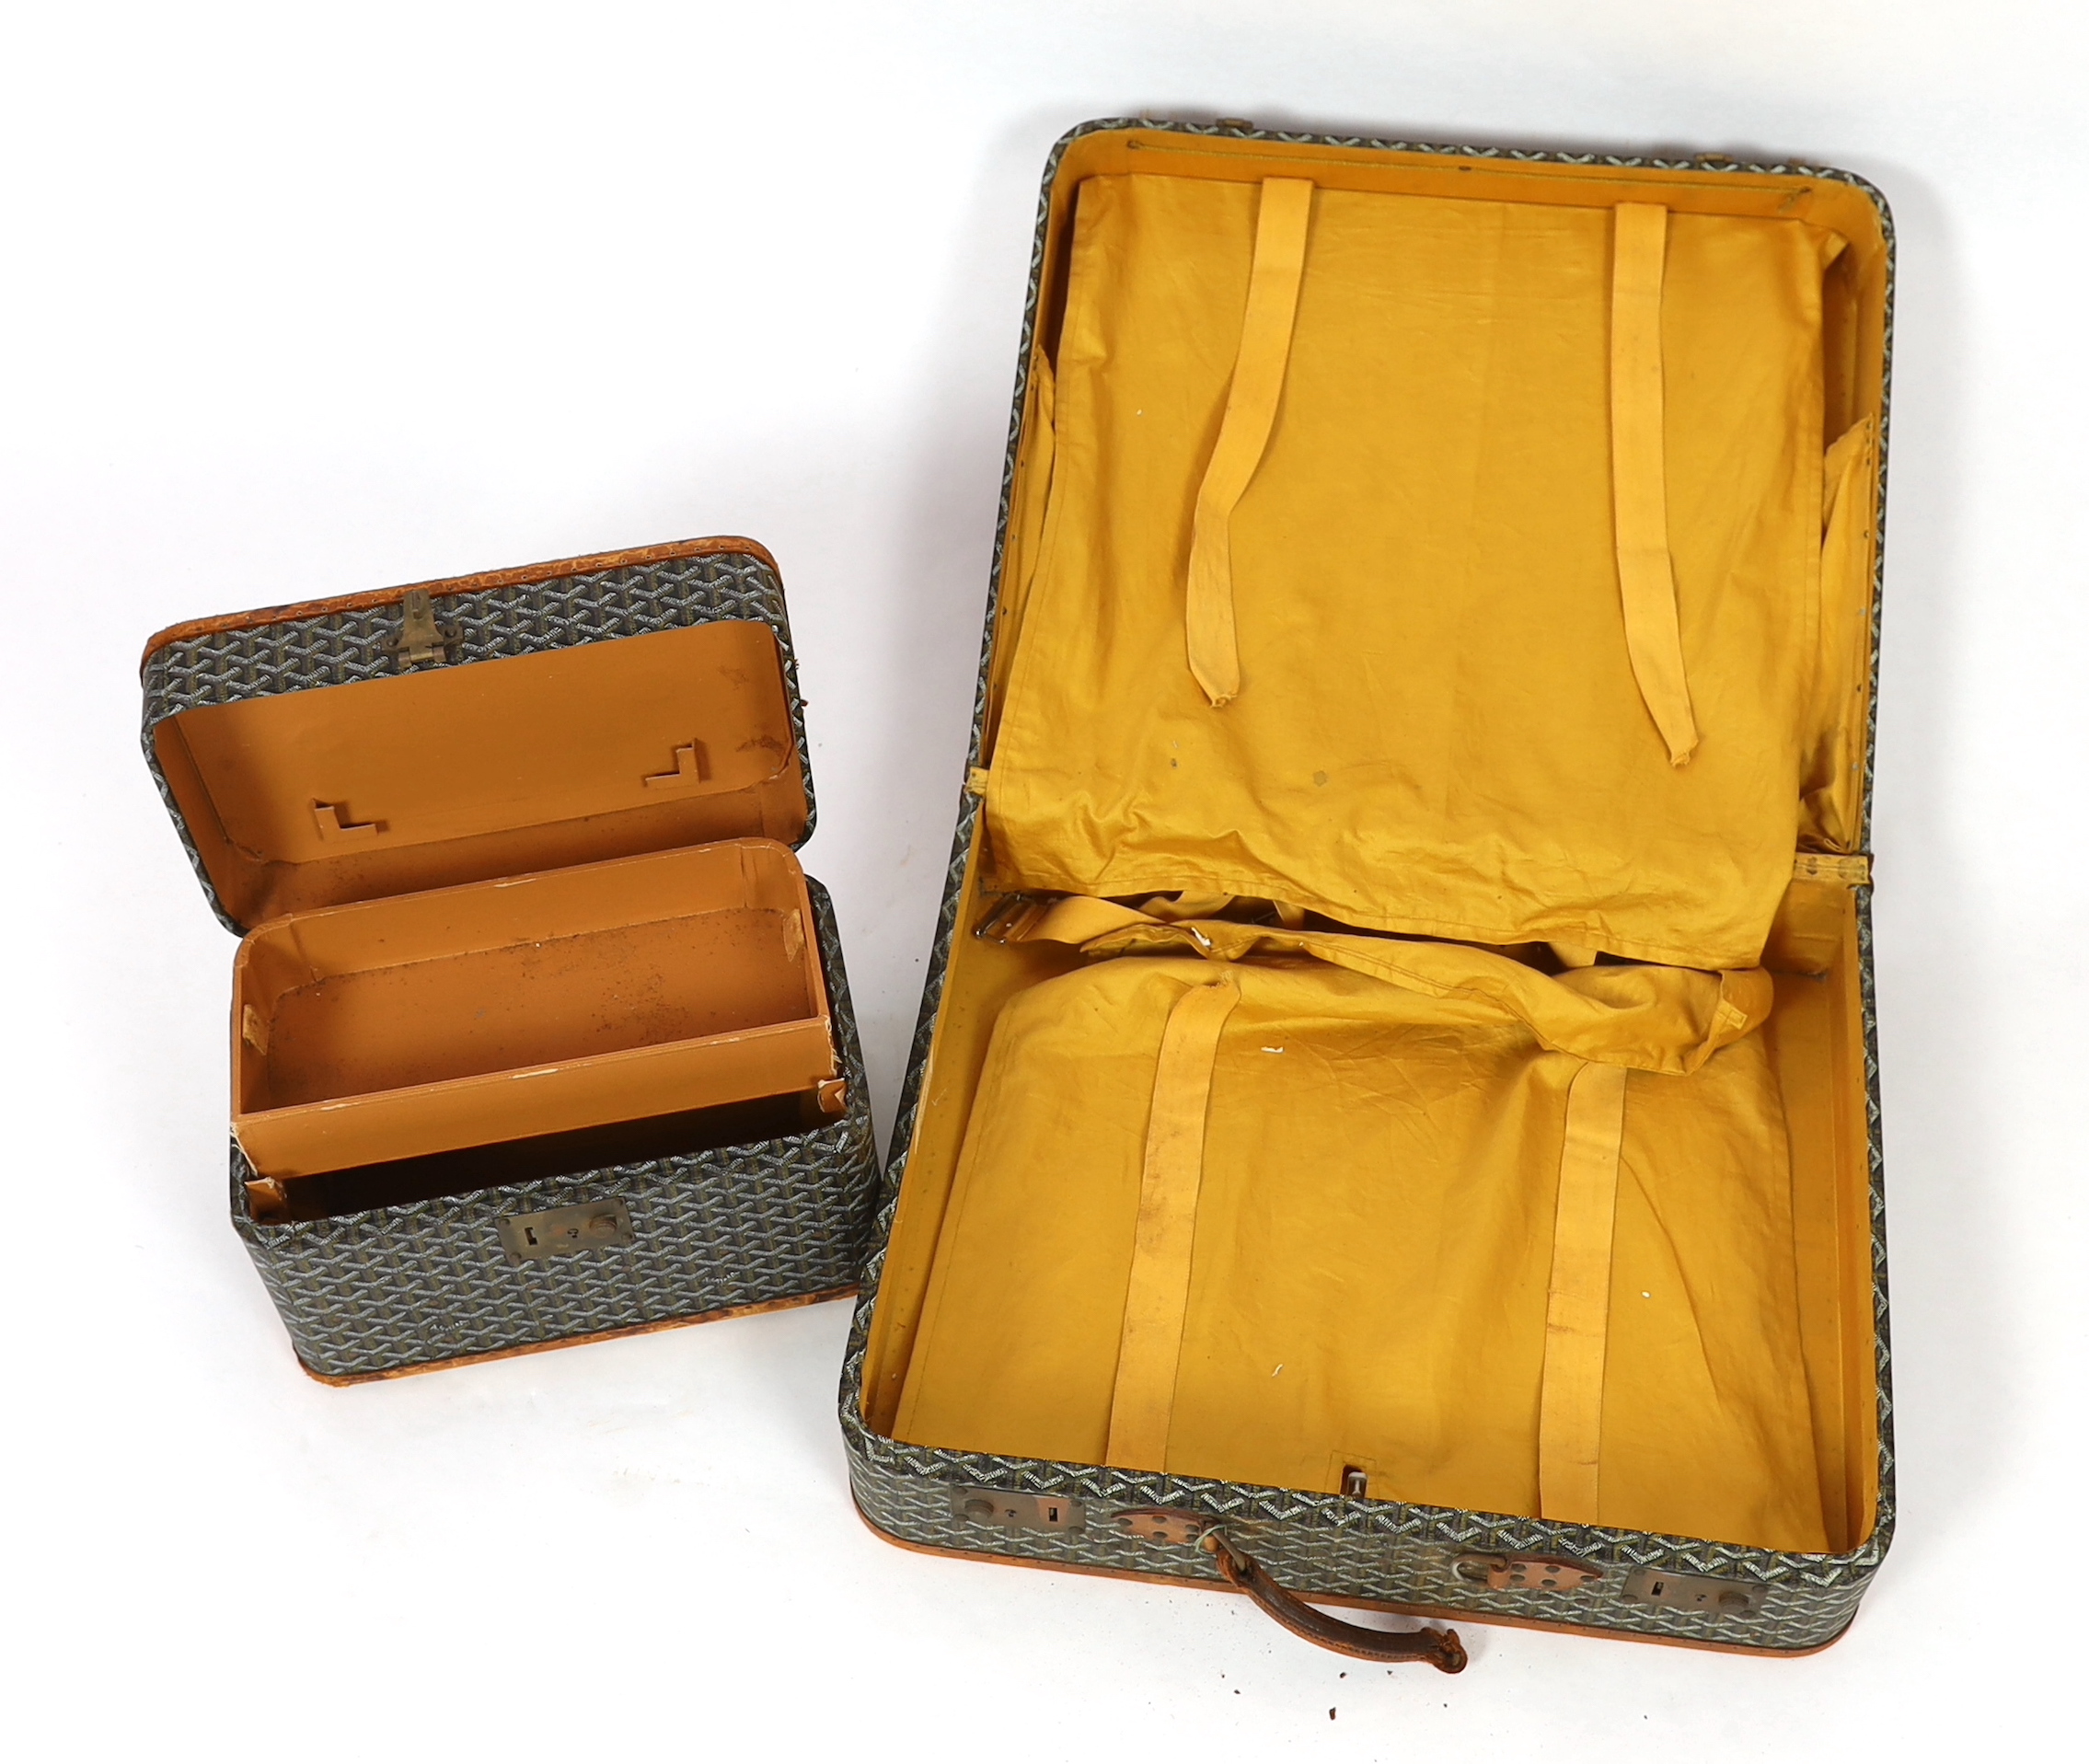 A 1940's Goyard vanity case with matching suitcase, vanity case 37cm wide, 23cm deep, 23cm high; suitcase 59cm wide, 21cm deep, 50cm high